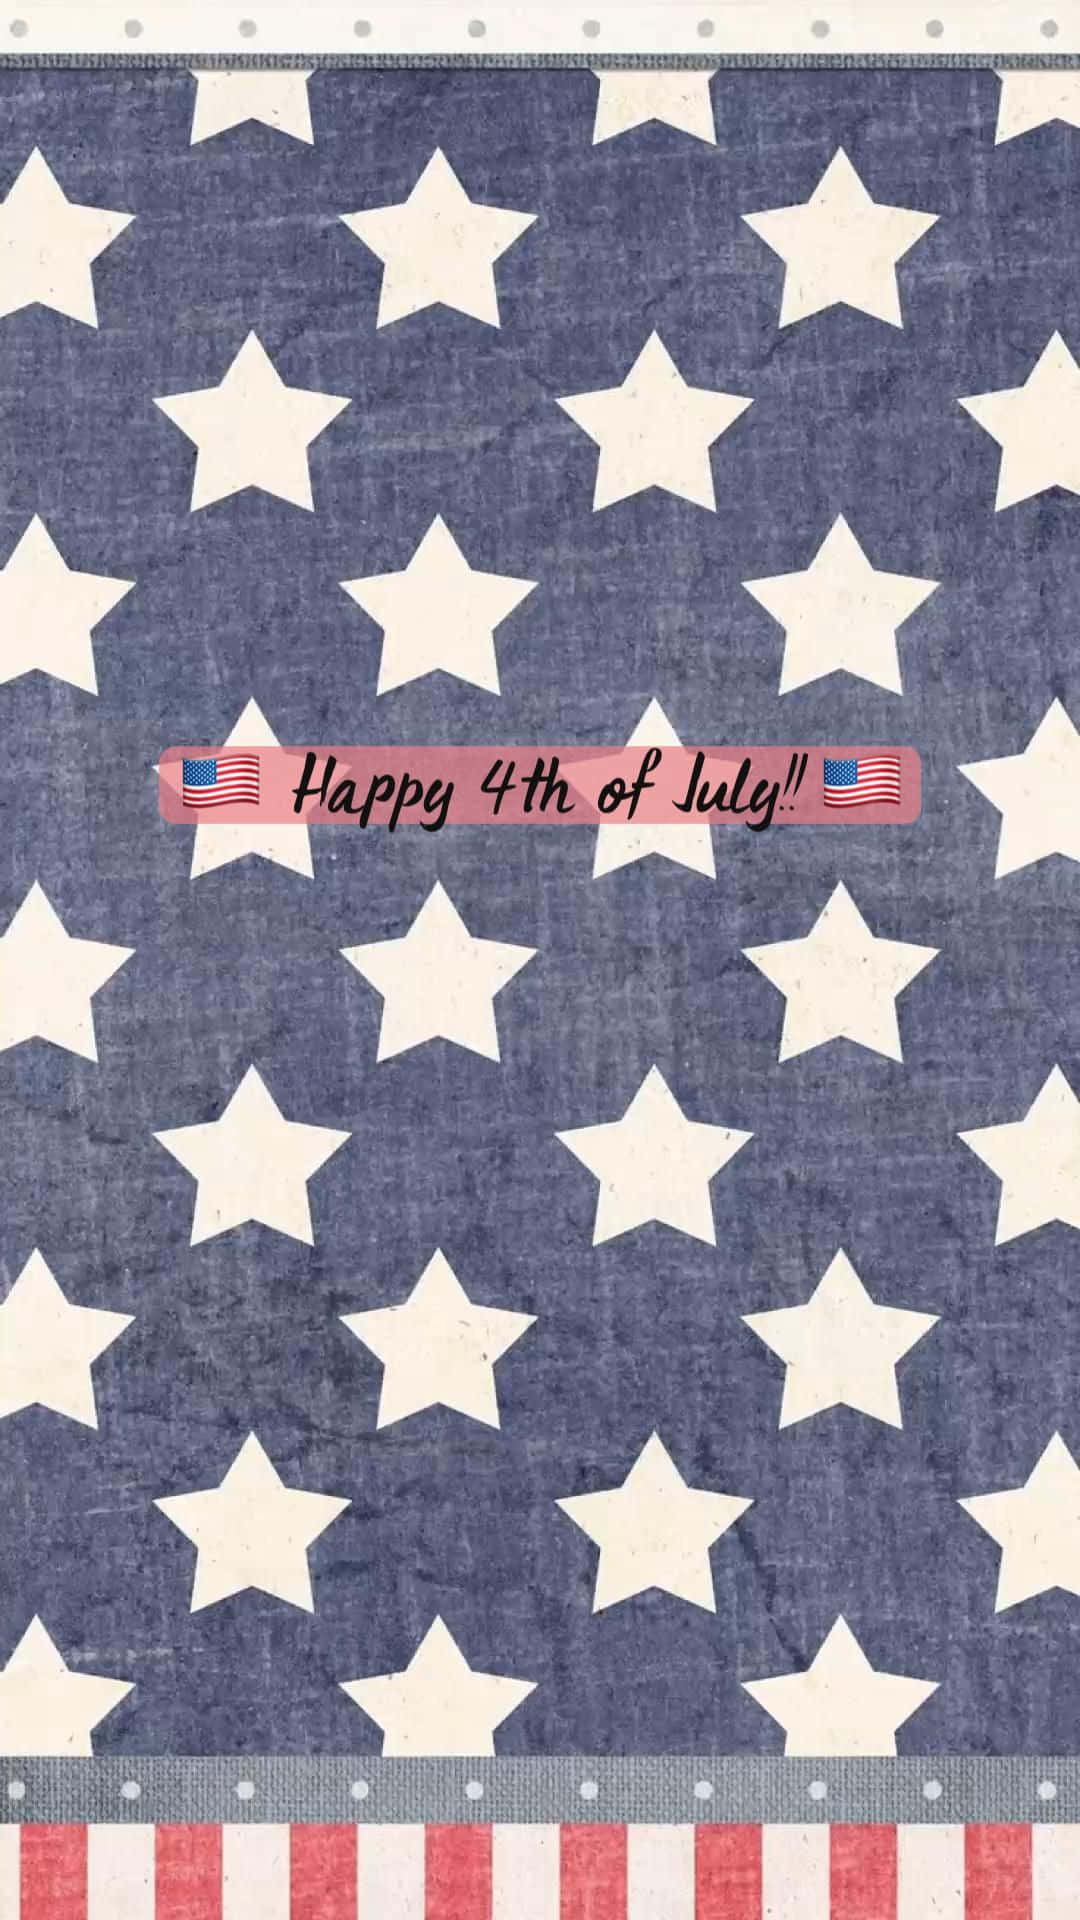 Celebrate the 4th of July with this cute illustration!